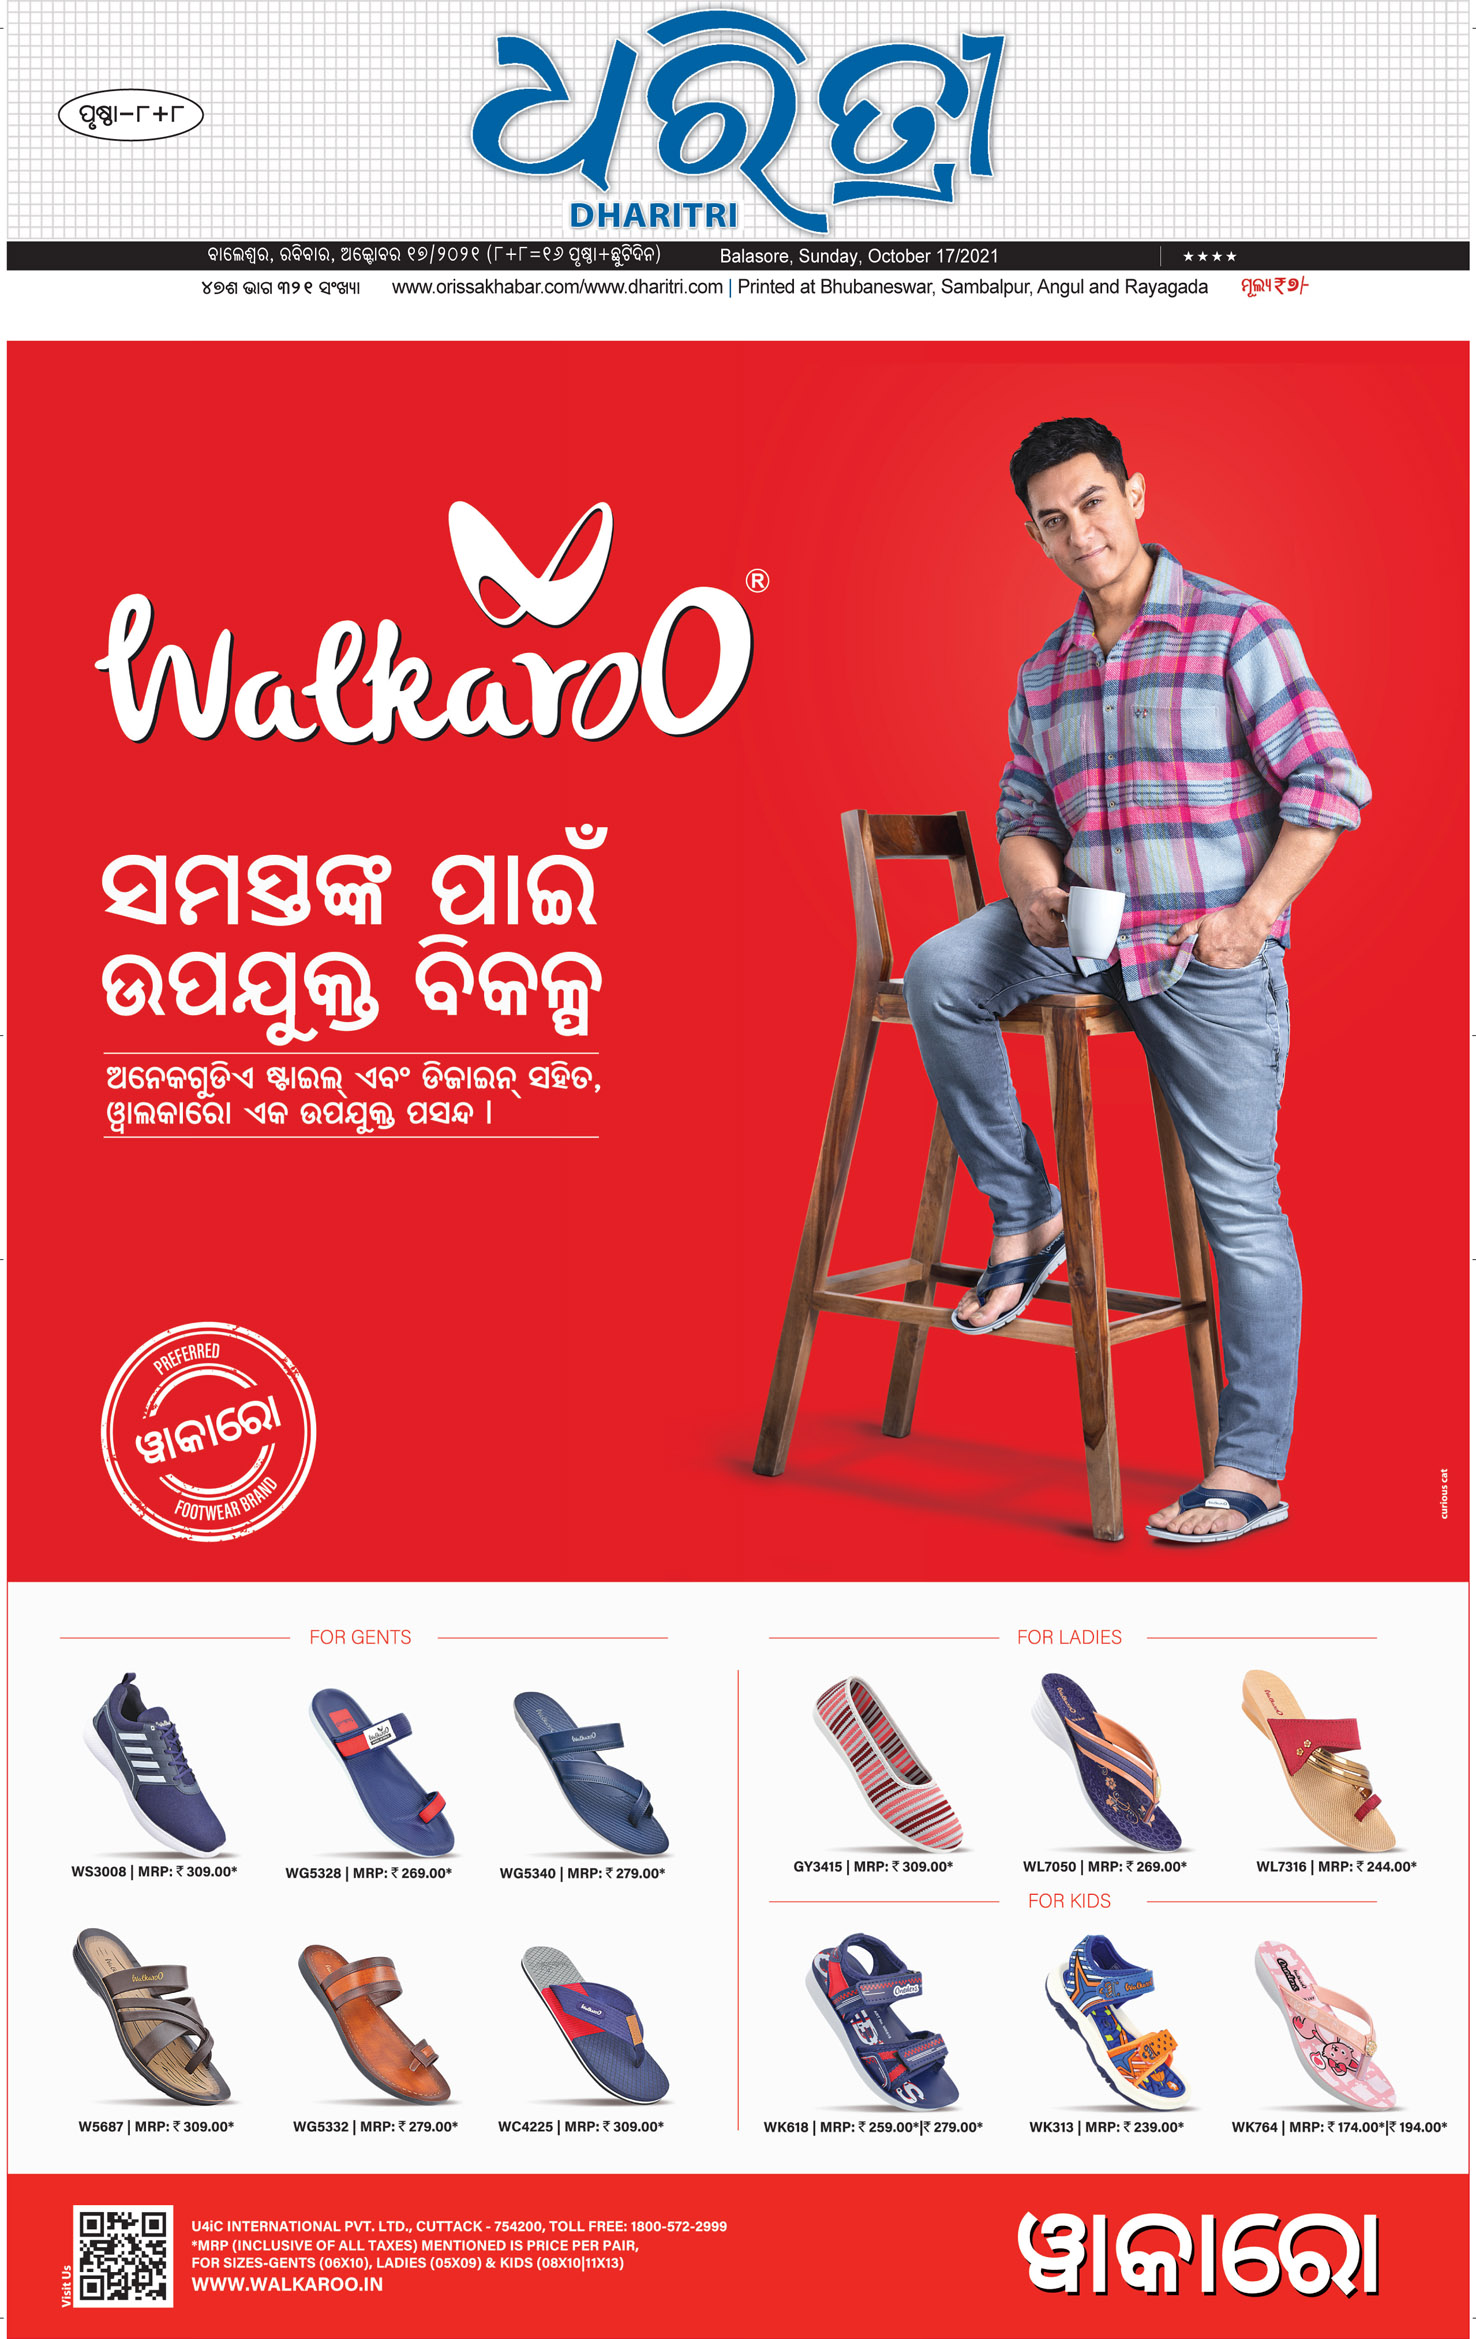 Ajay Devgn to now endorse for affordable Footwear brand Walkaroo; replaces  Amir Khan